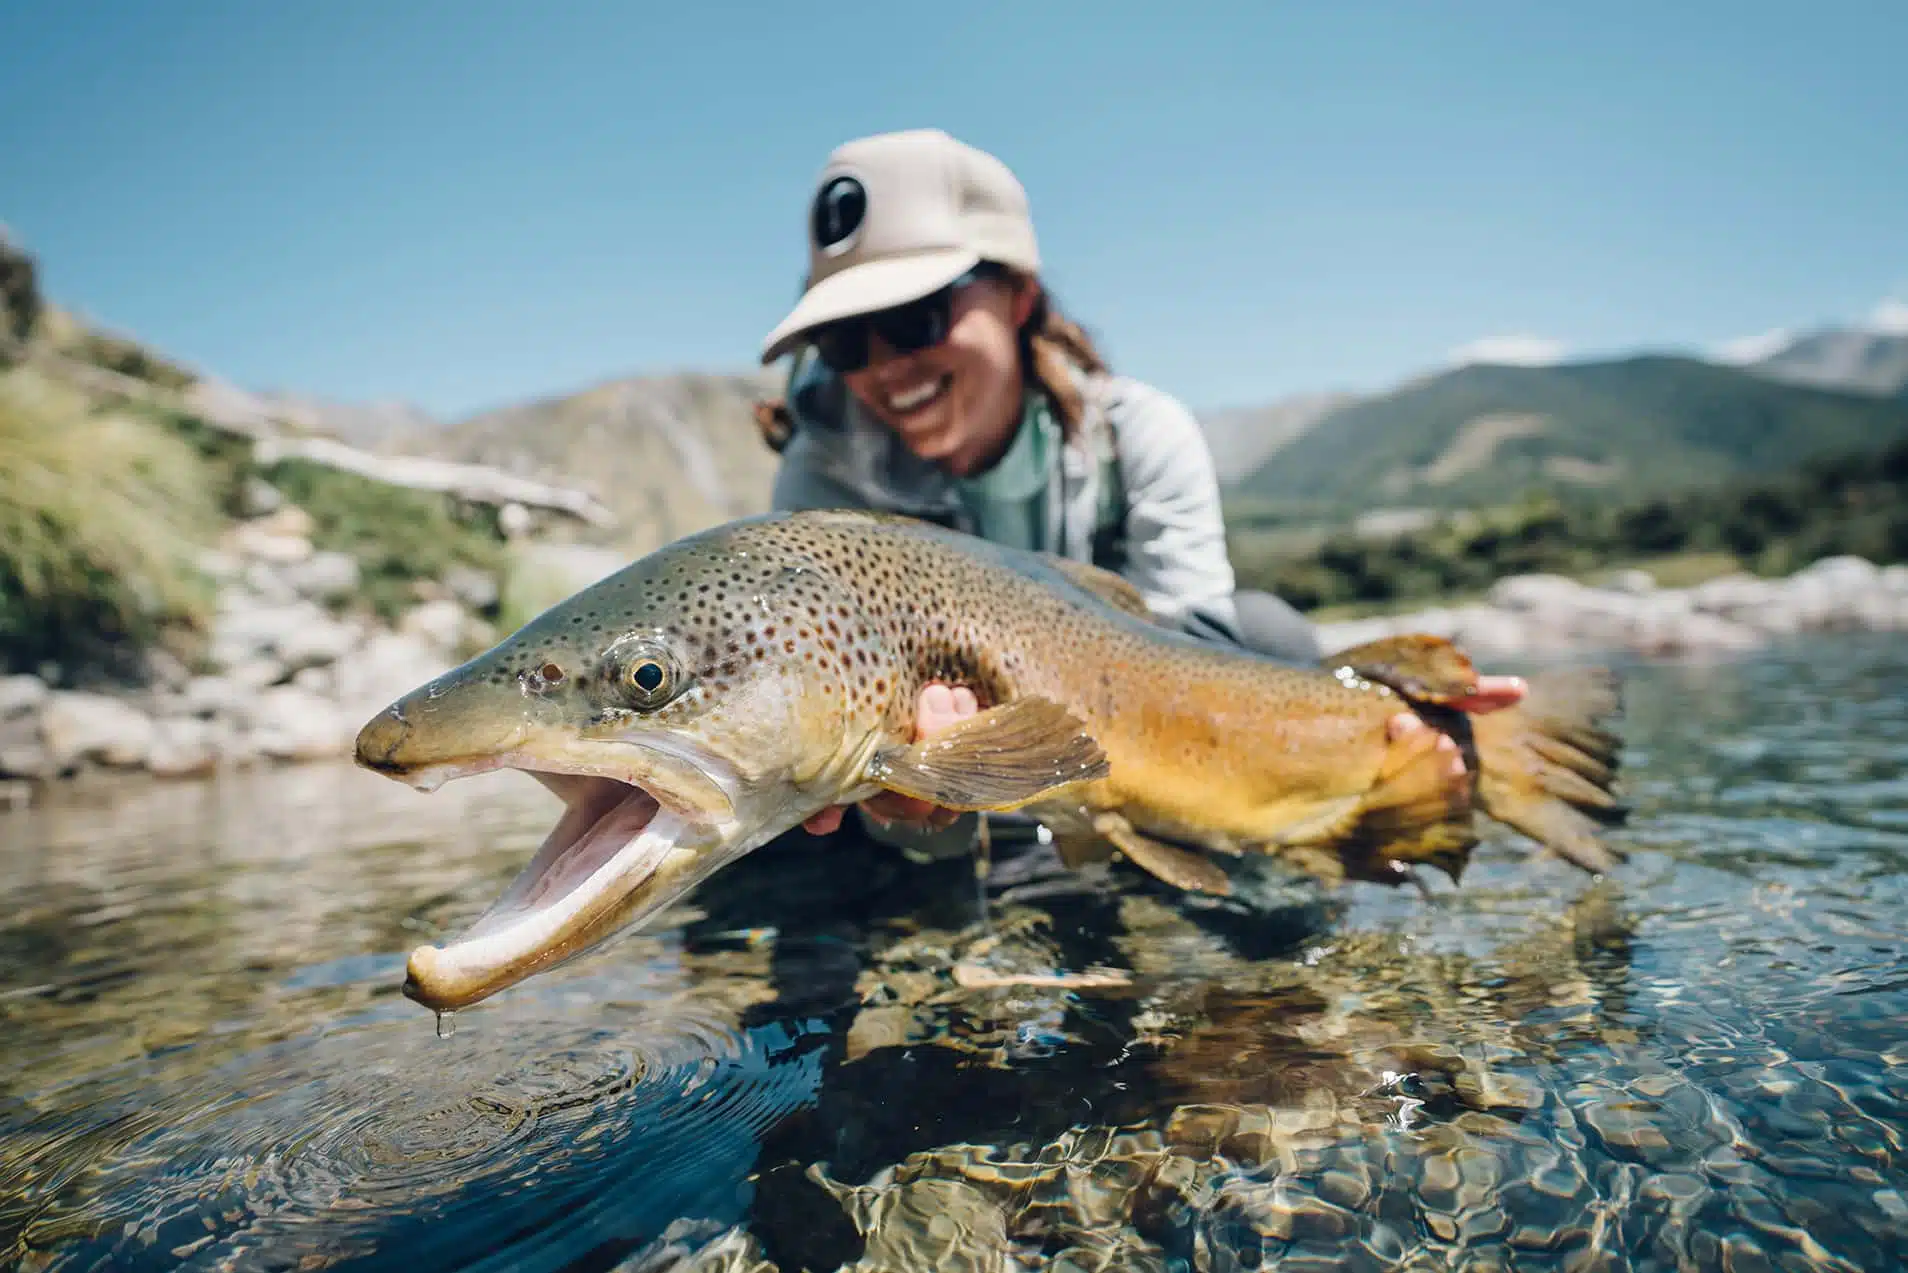 Hooked on Colorado: A Guide to the Best Fly Fishing in Colorado